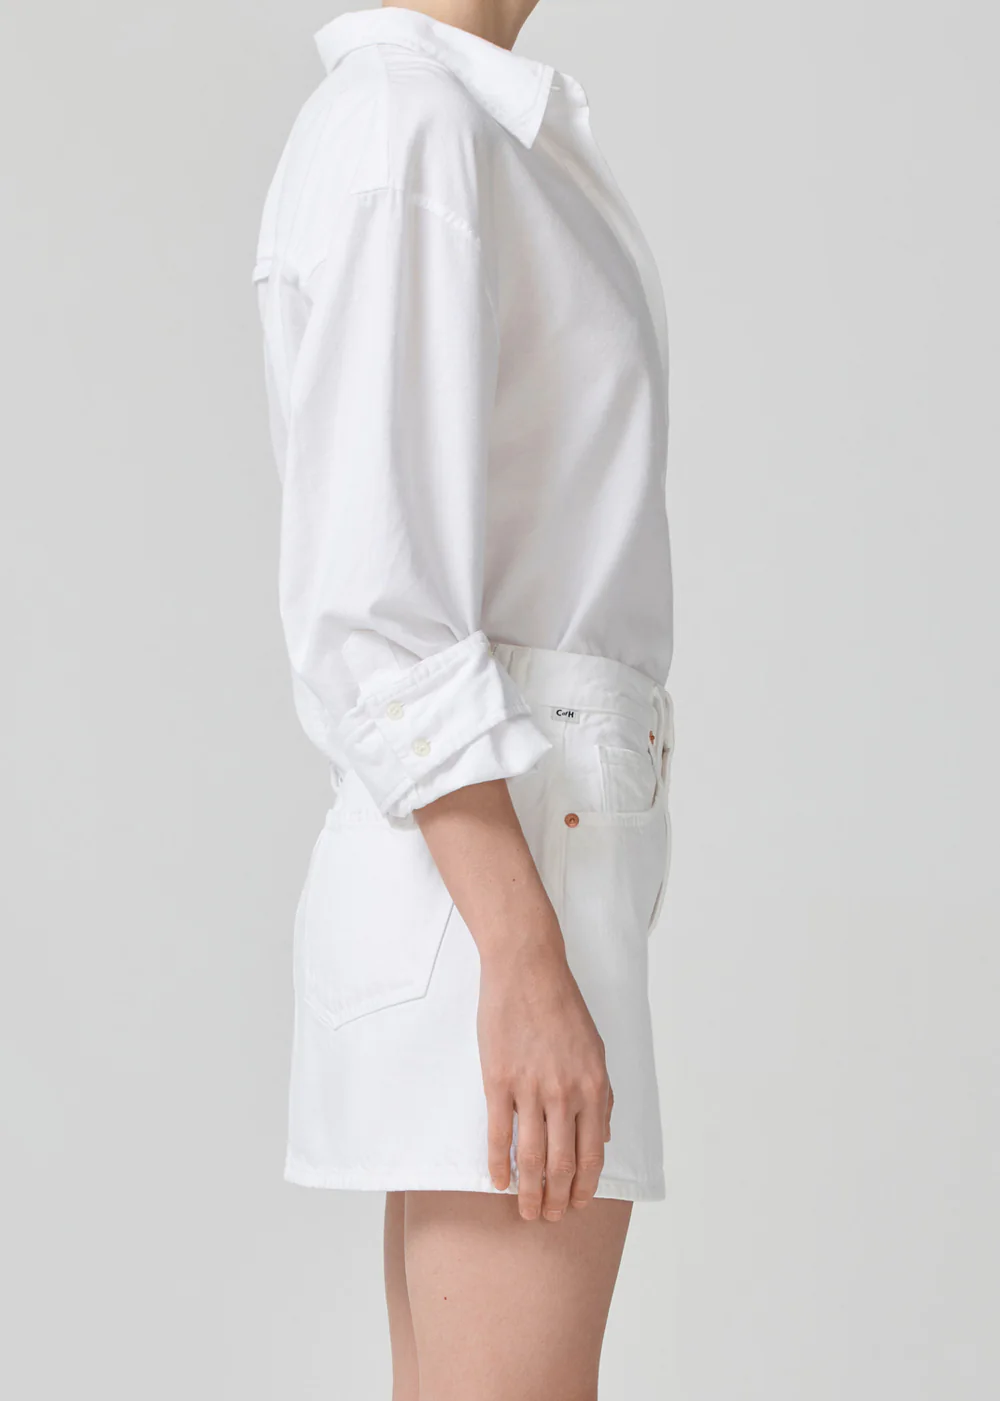 Citizens of Humanity - Aave Oversized Cuff Shirt in Oxford White